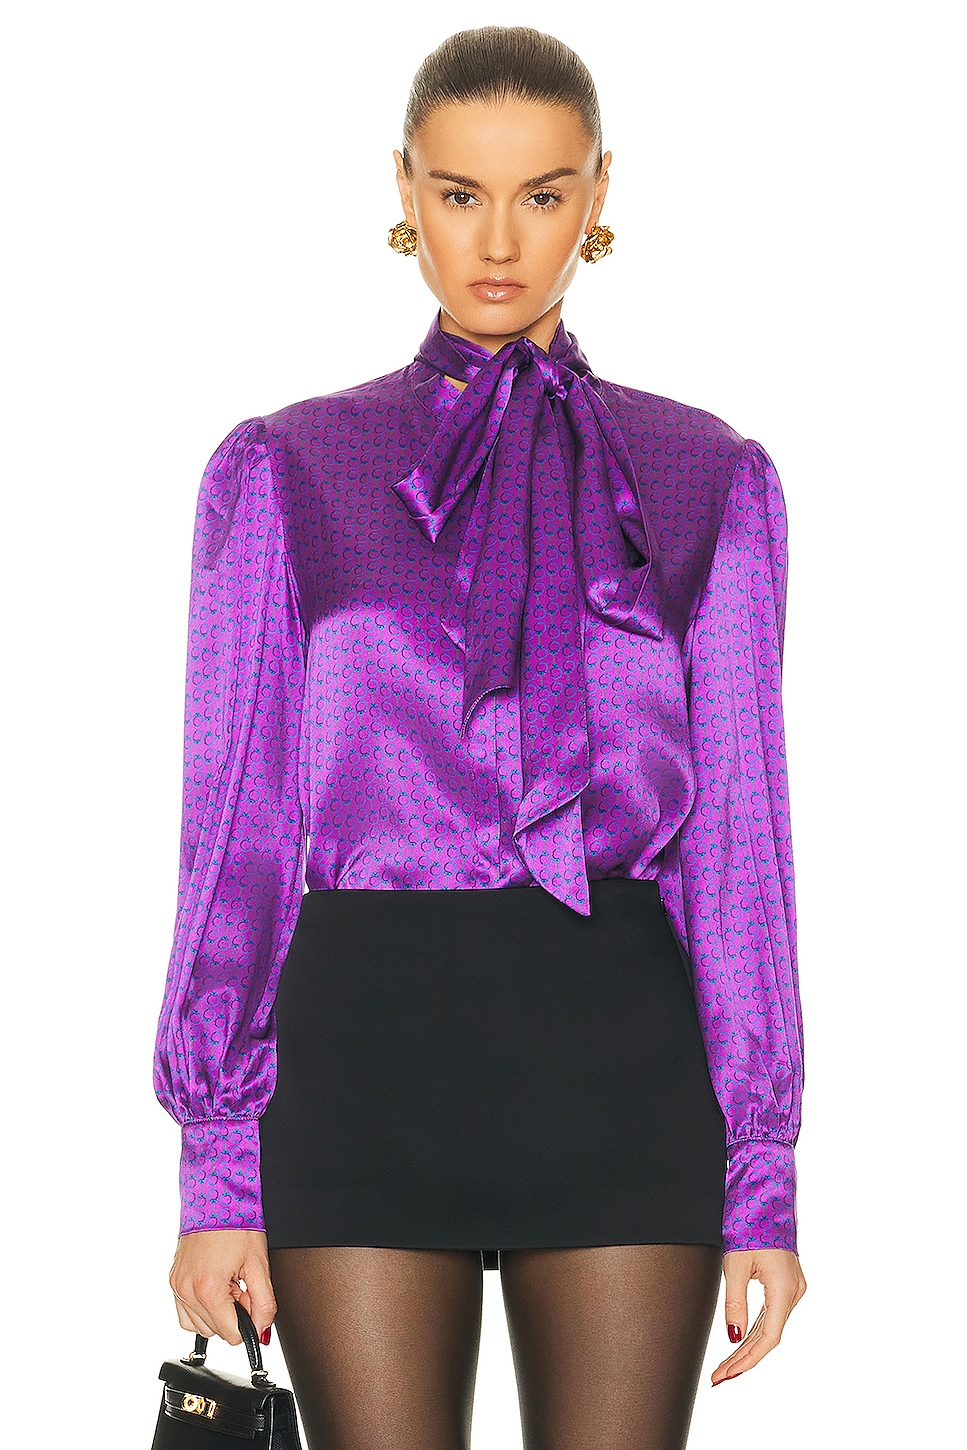 Image 1 of Kiki de Montparnasse Handcuff Pussy Bow Blouse in French Violet Handcuff